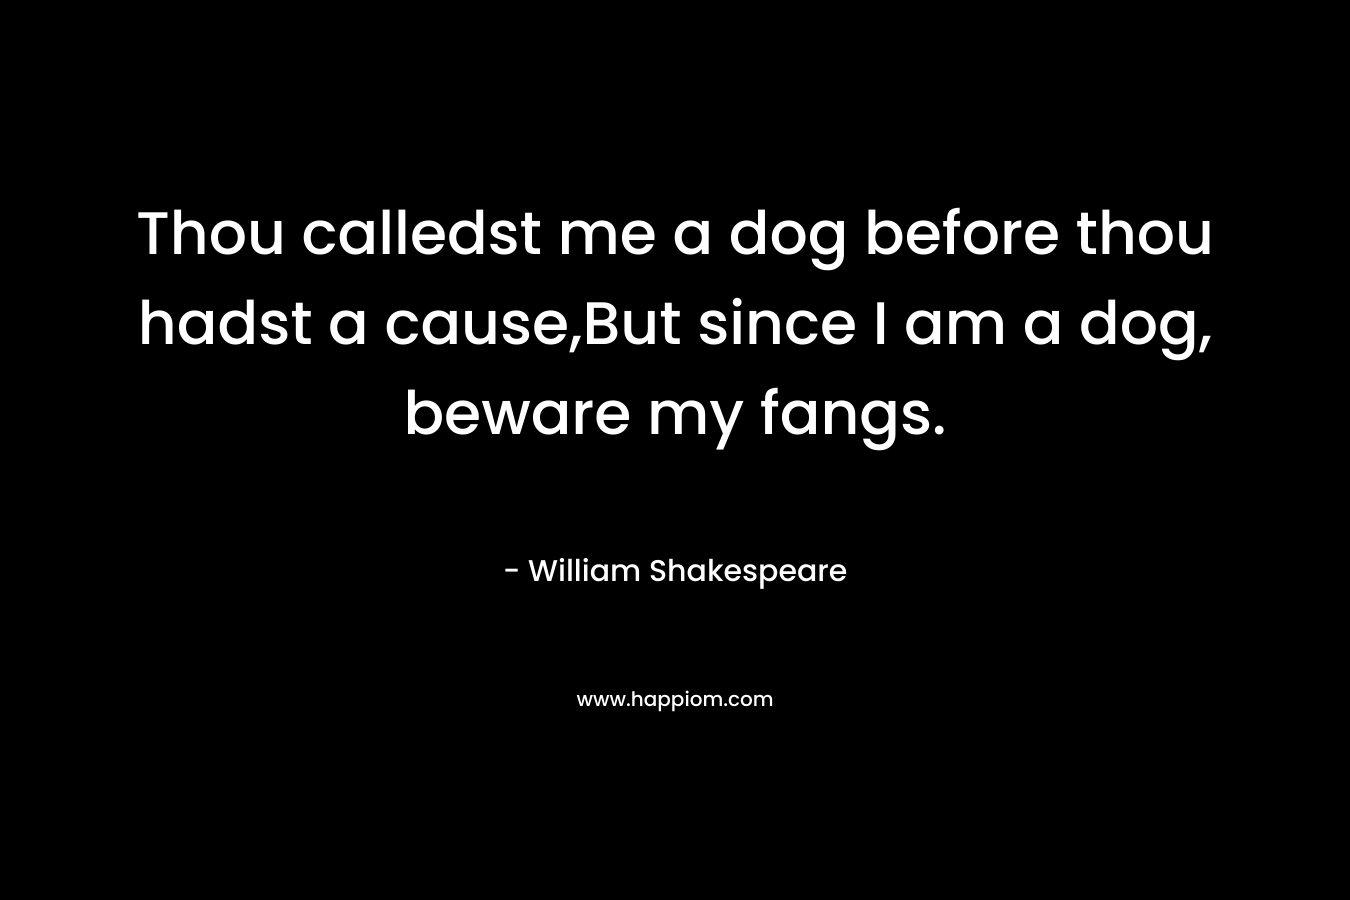 Thou calledst me a dog before thou hadst a cause,But since I am a dog, beware my fangs. – William Shakespeare